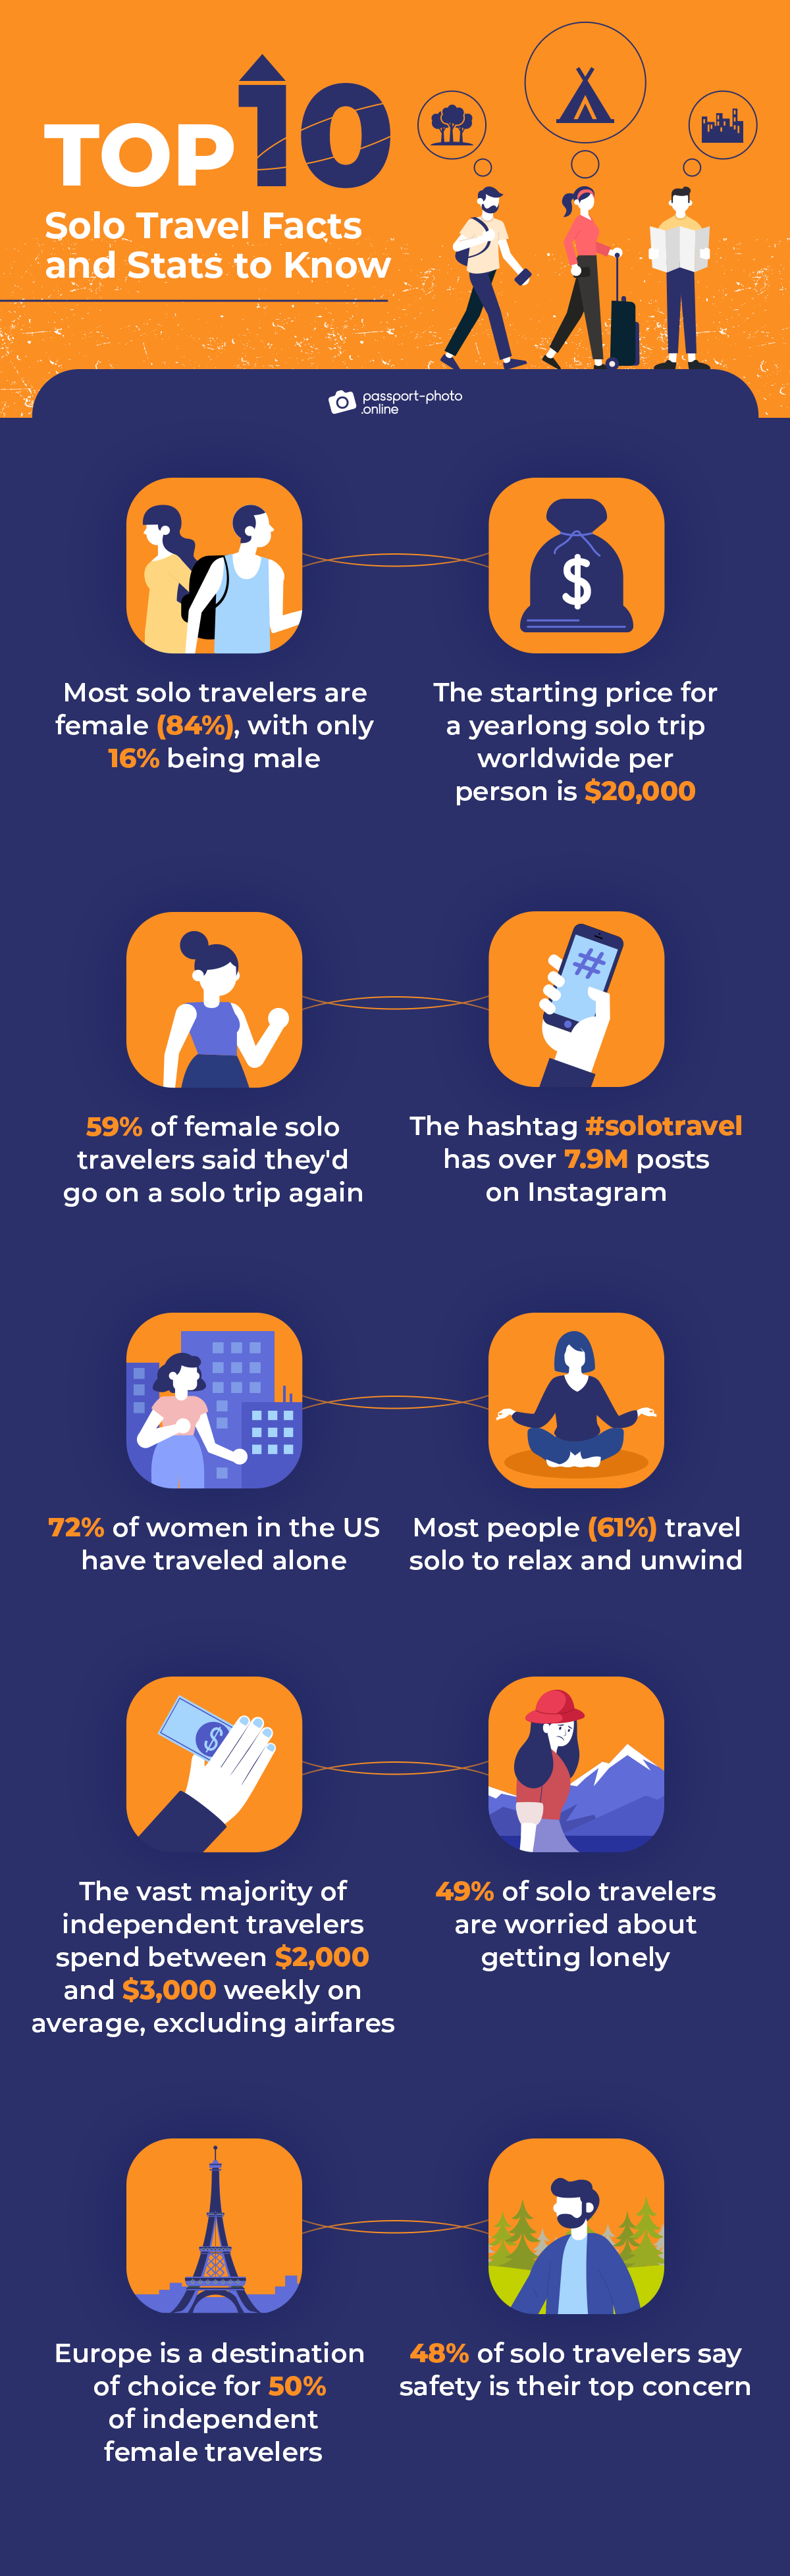 top 10 solo travel statistics and facts